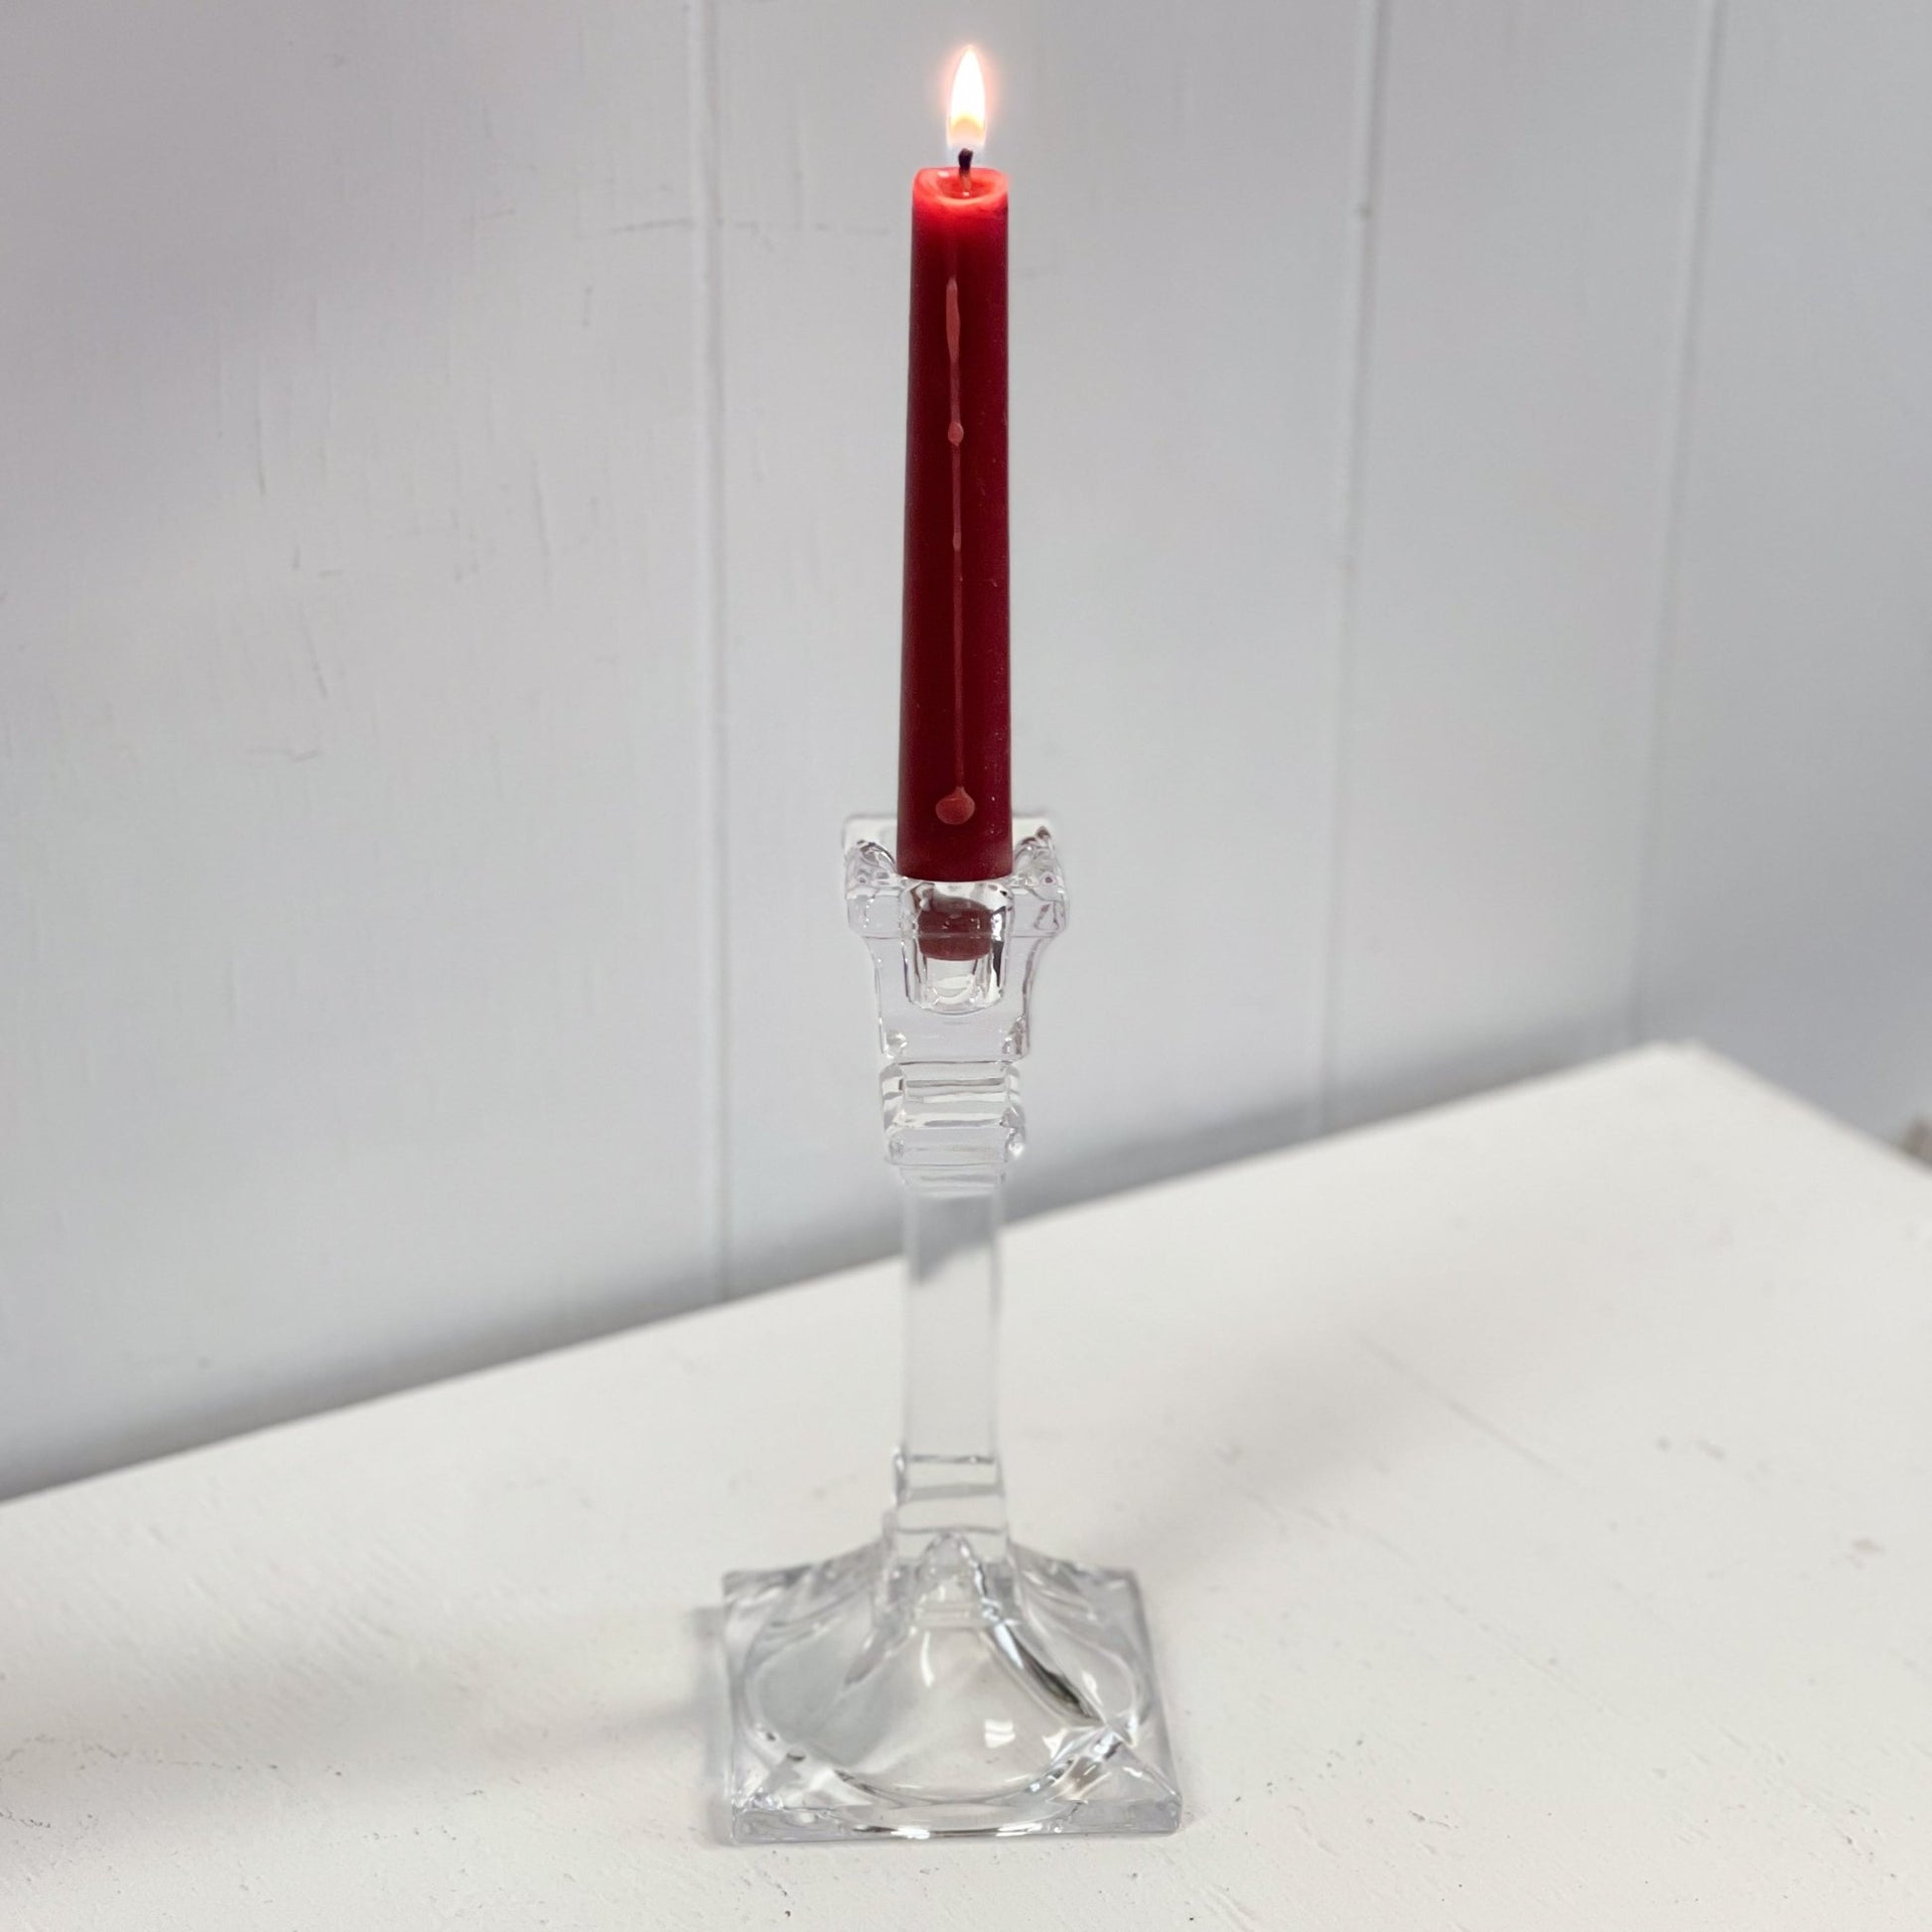 Lead Crystal Candlestick Holder by The Toscany Collection-The Toscany Collection-Candlestick Holder-Stockton Farm